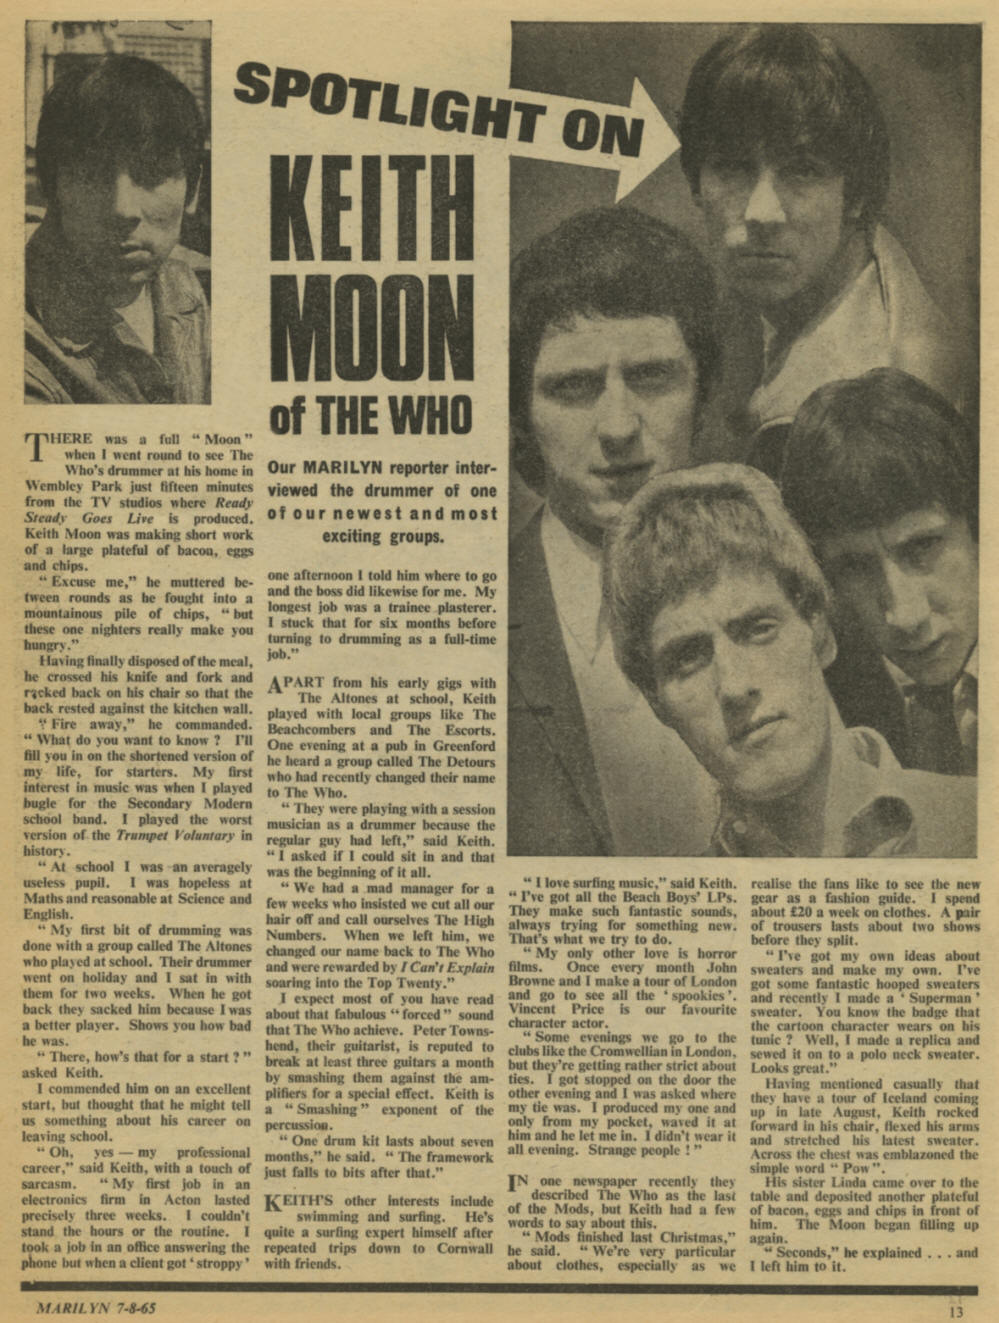 Spotlight On Keith Moon Of The Who - Marilyn Magazine - August 7, 1965 - UK